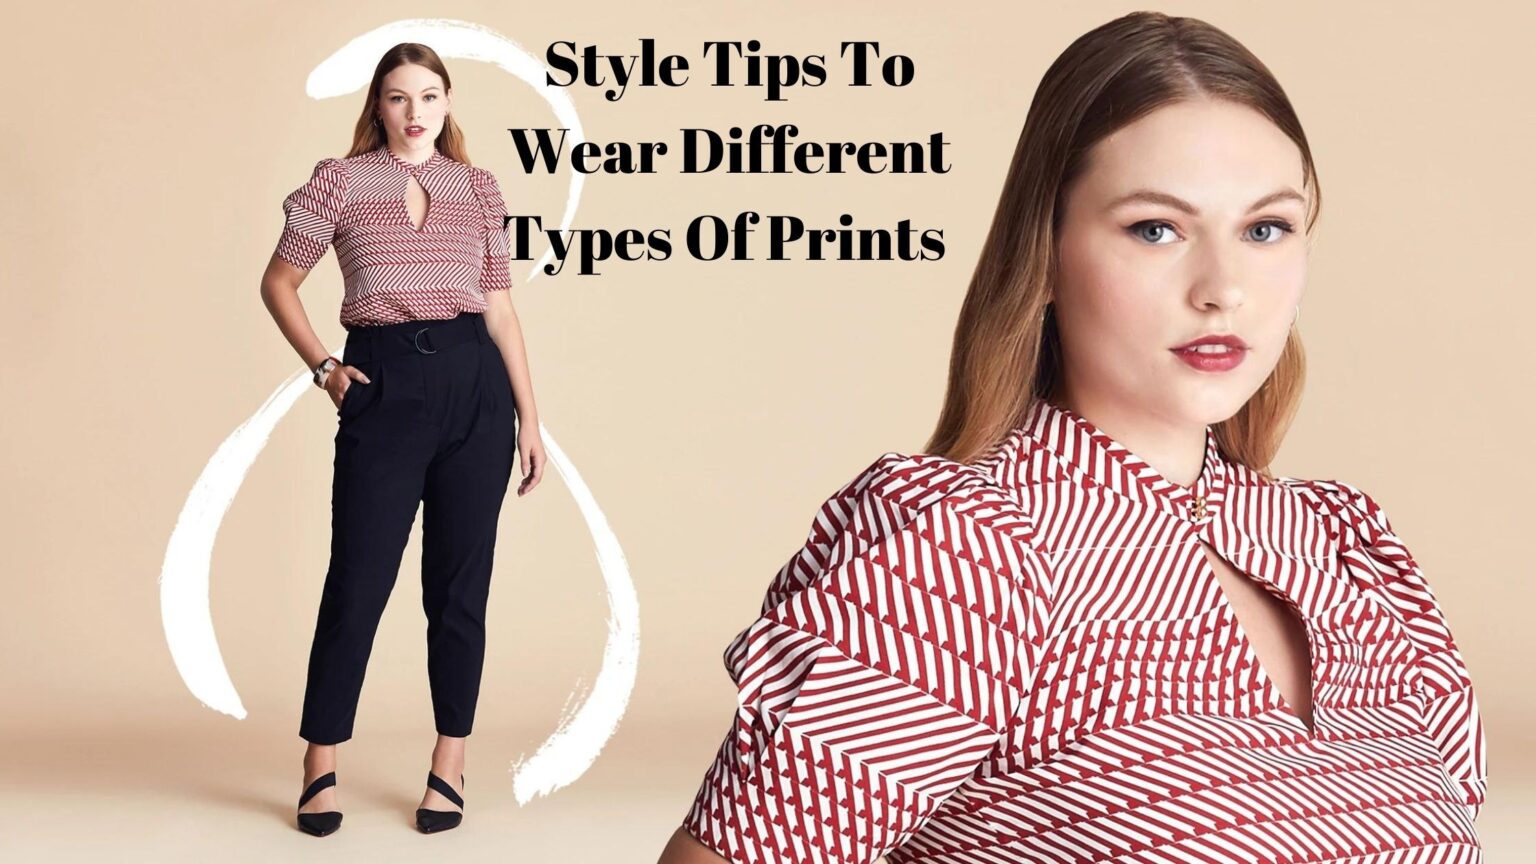 Style Tips To Wear Different Types Of Prints - Power Day Sale